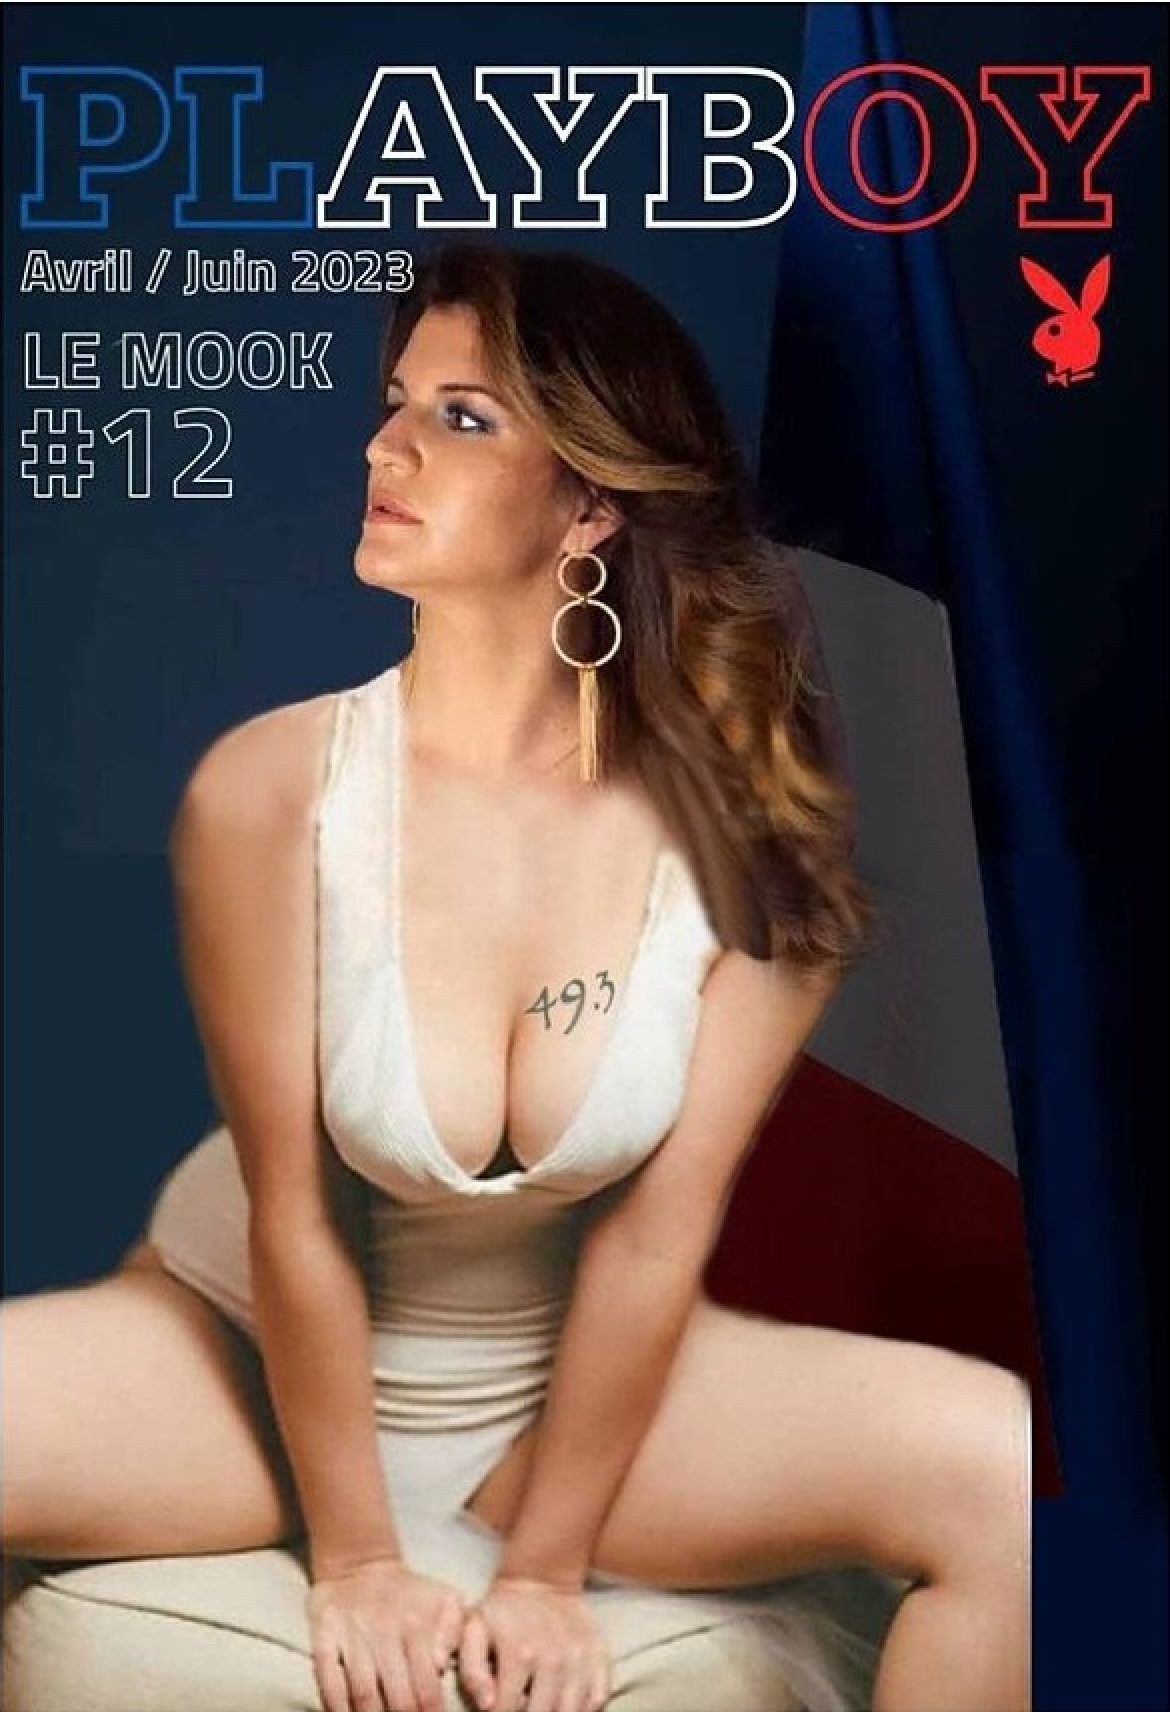 French minister in Playboy shoot says women have right to pose nude if they wanted to South China Morning Post image image